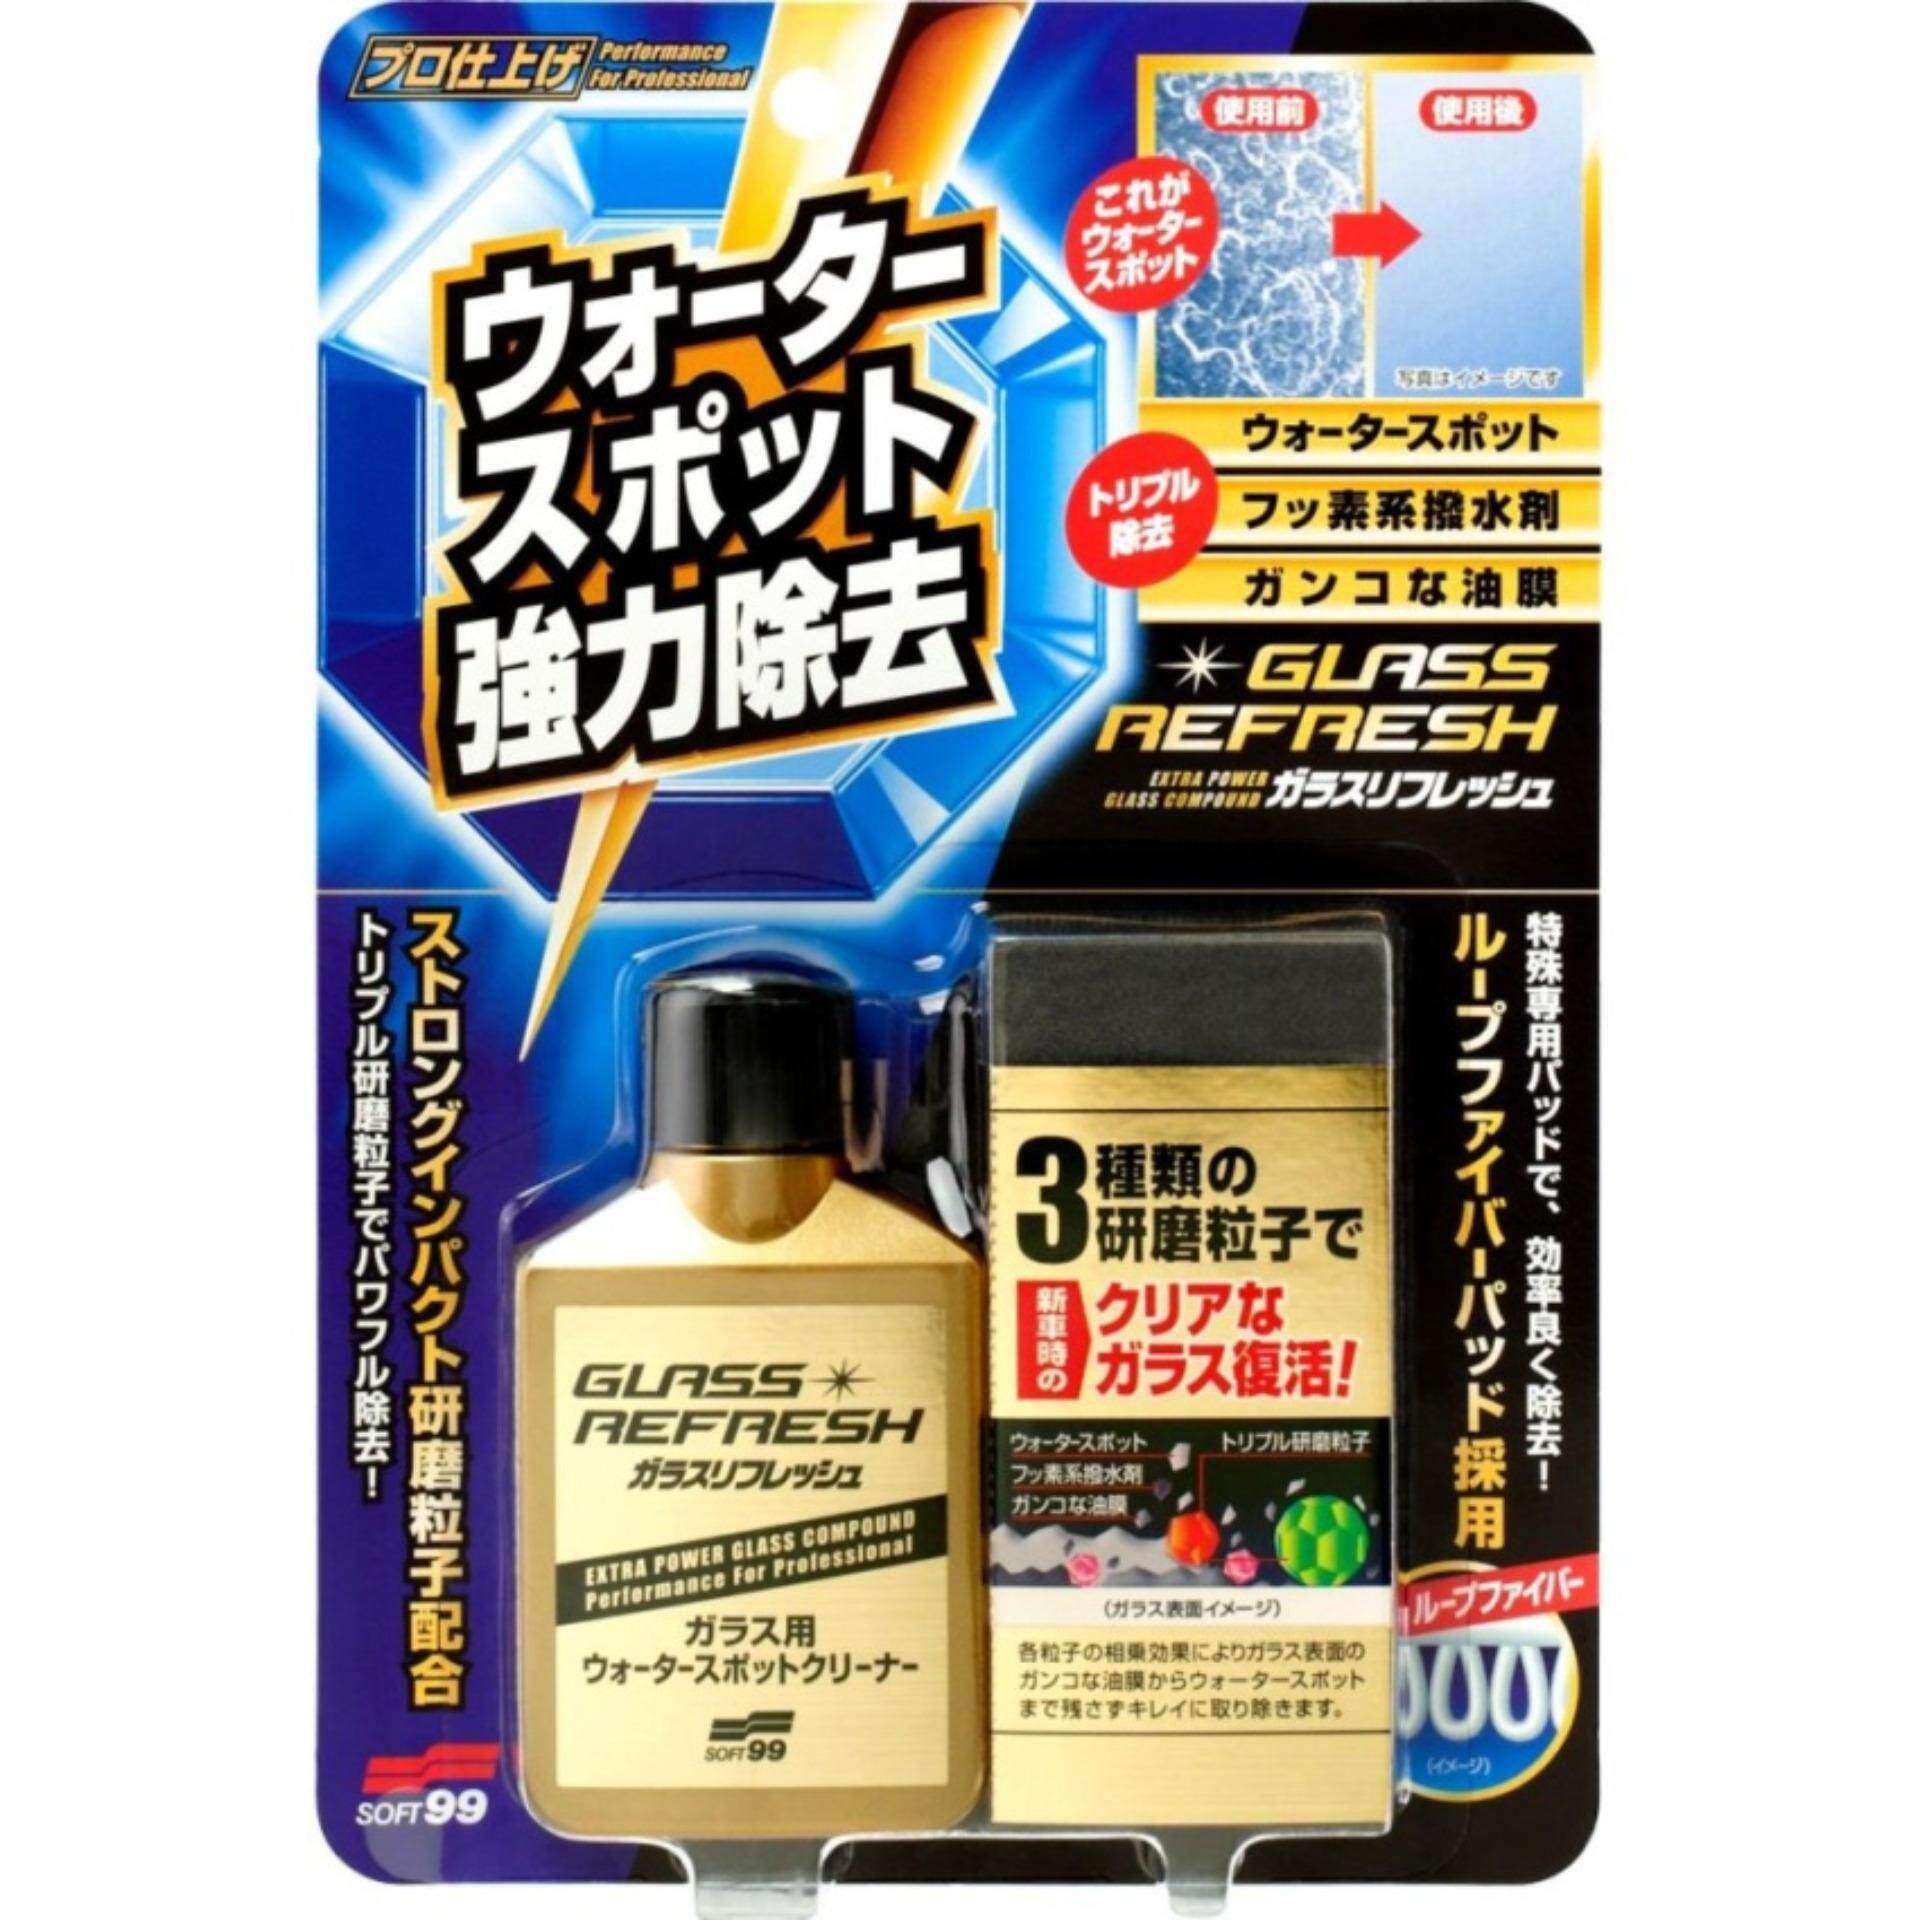 ( Free Gift ) Bundle Set For 2 Soft 99 / Soft99 - GLACO Series-NO1 BEST SELLING IN JAPAN Glass Stain Cleaner + Ultra Glaco